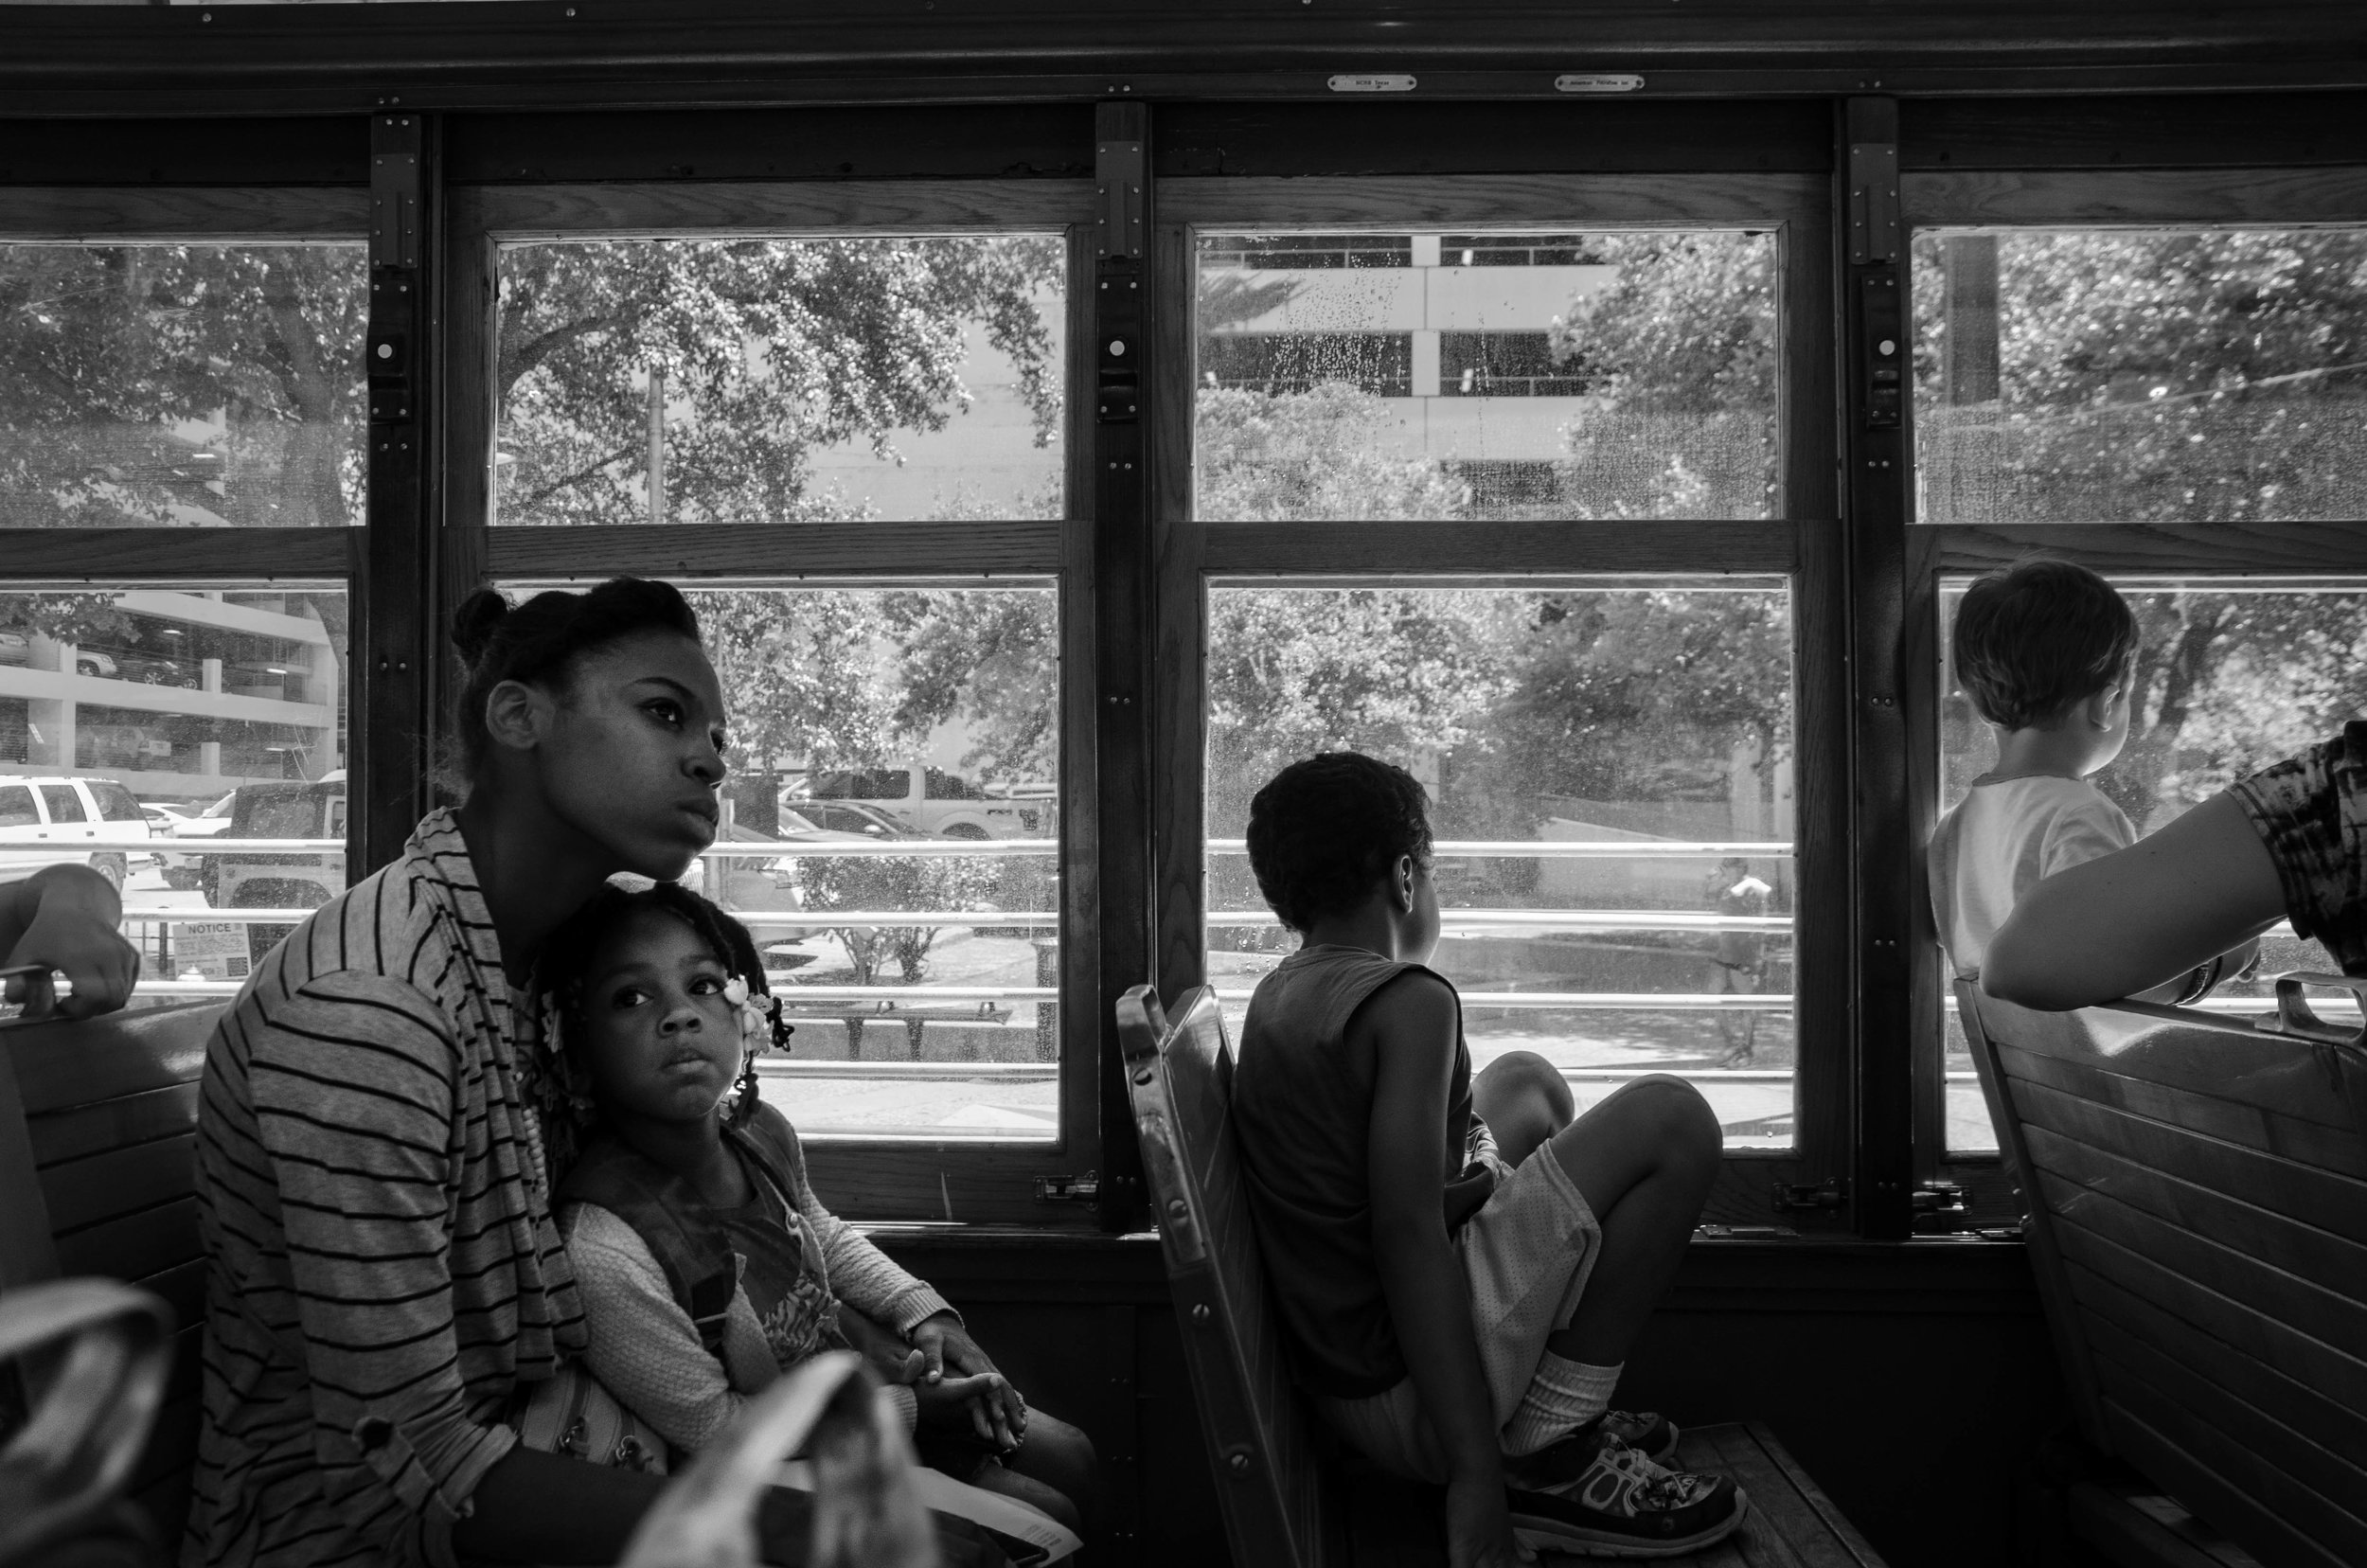  Two young women ride the trolley in Dallas, Texas. 